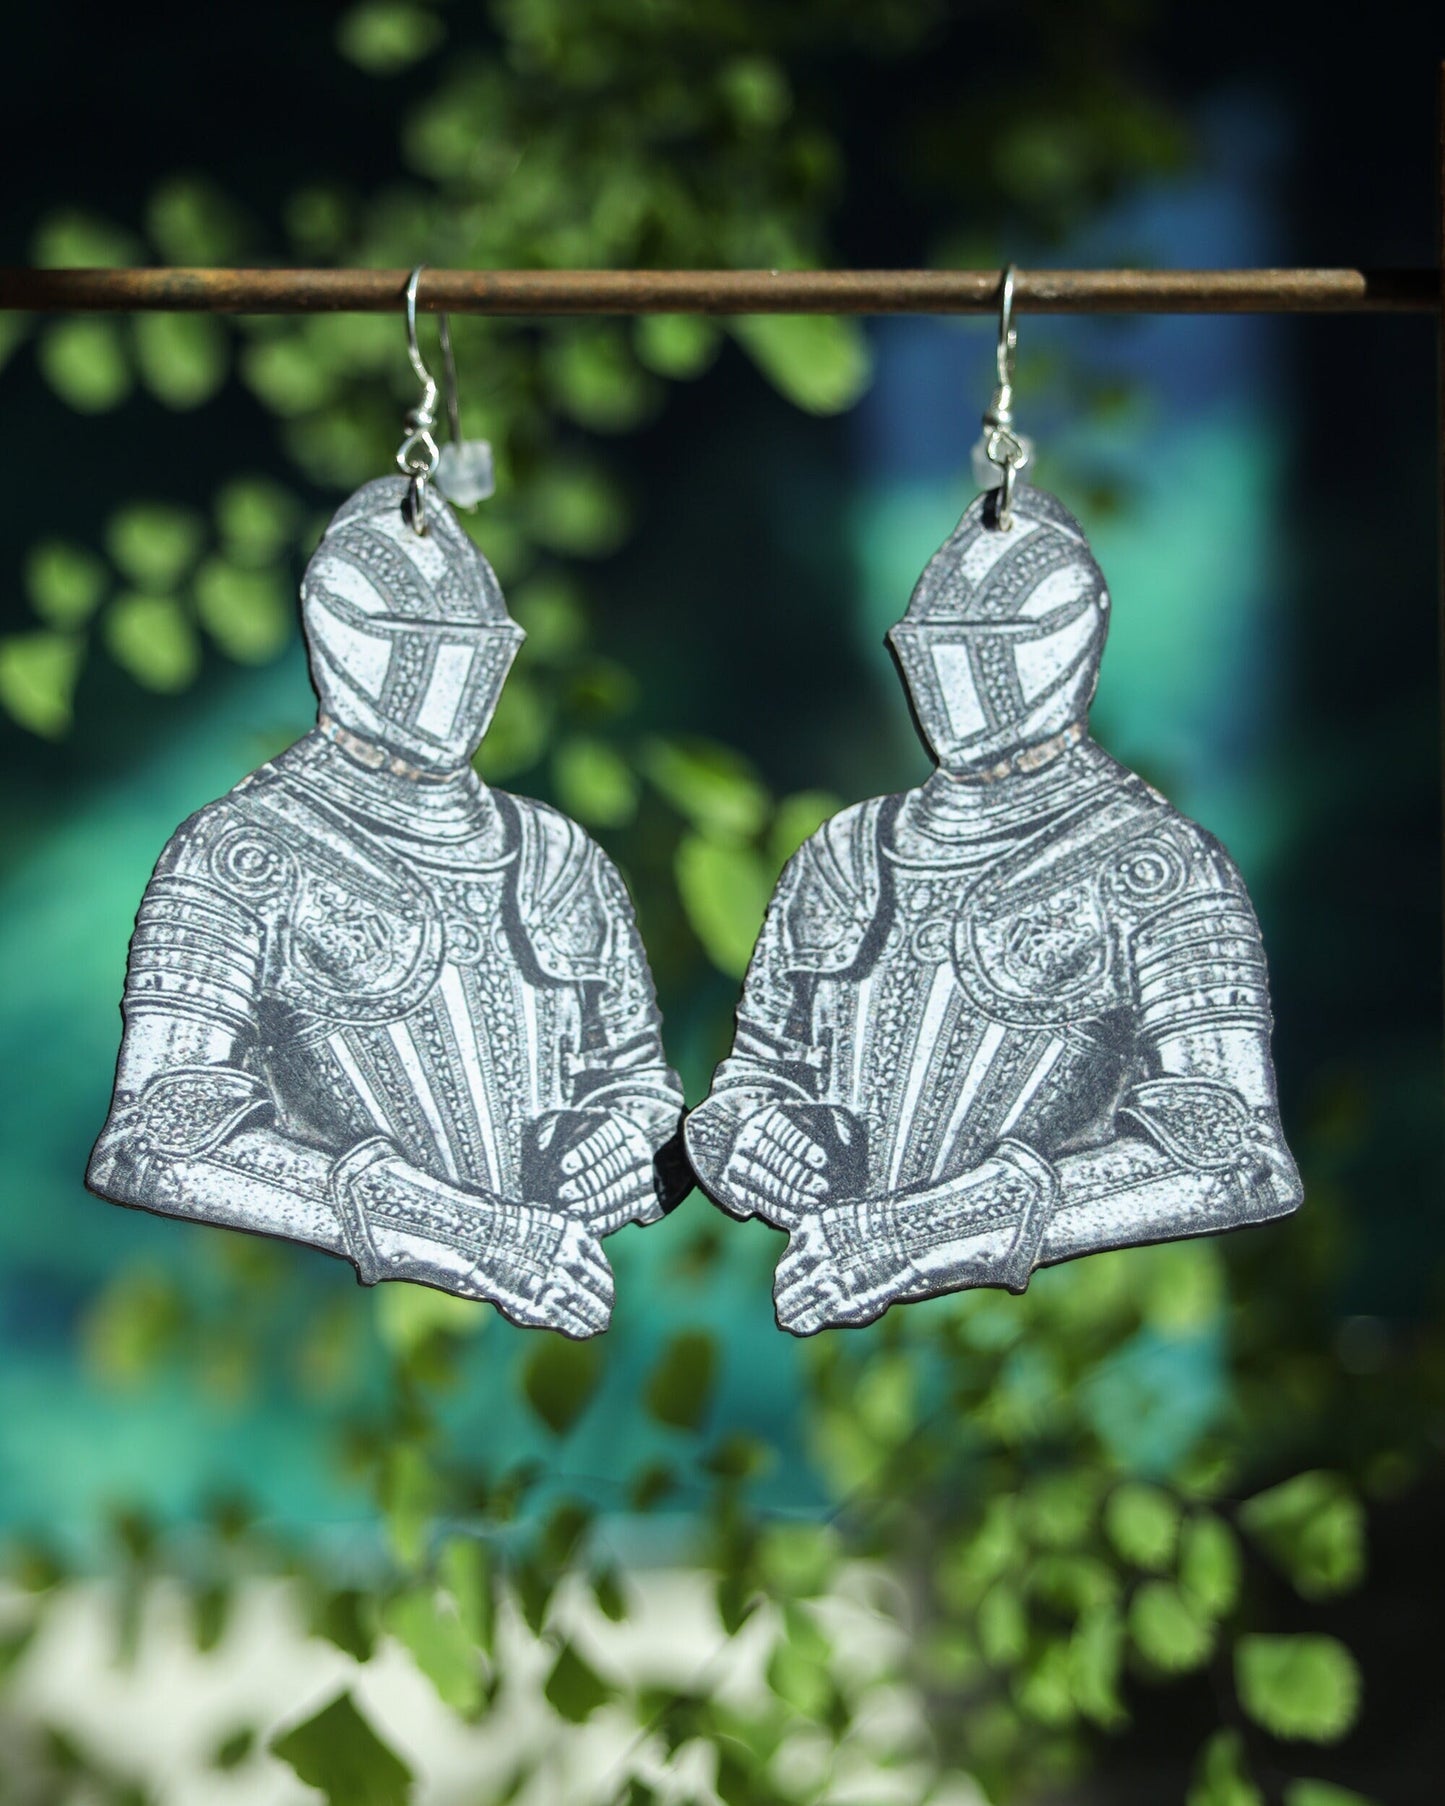 Knight Earrings | Wood Cut Medieval Jewelry | Renaissance Dark Armored Noblemen Dangles | Sterling Silver Ear Wire | Fantasy Gothic Warrior